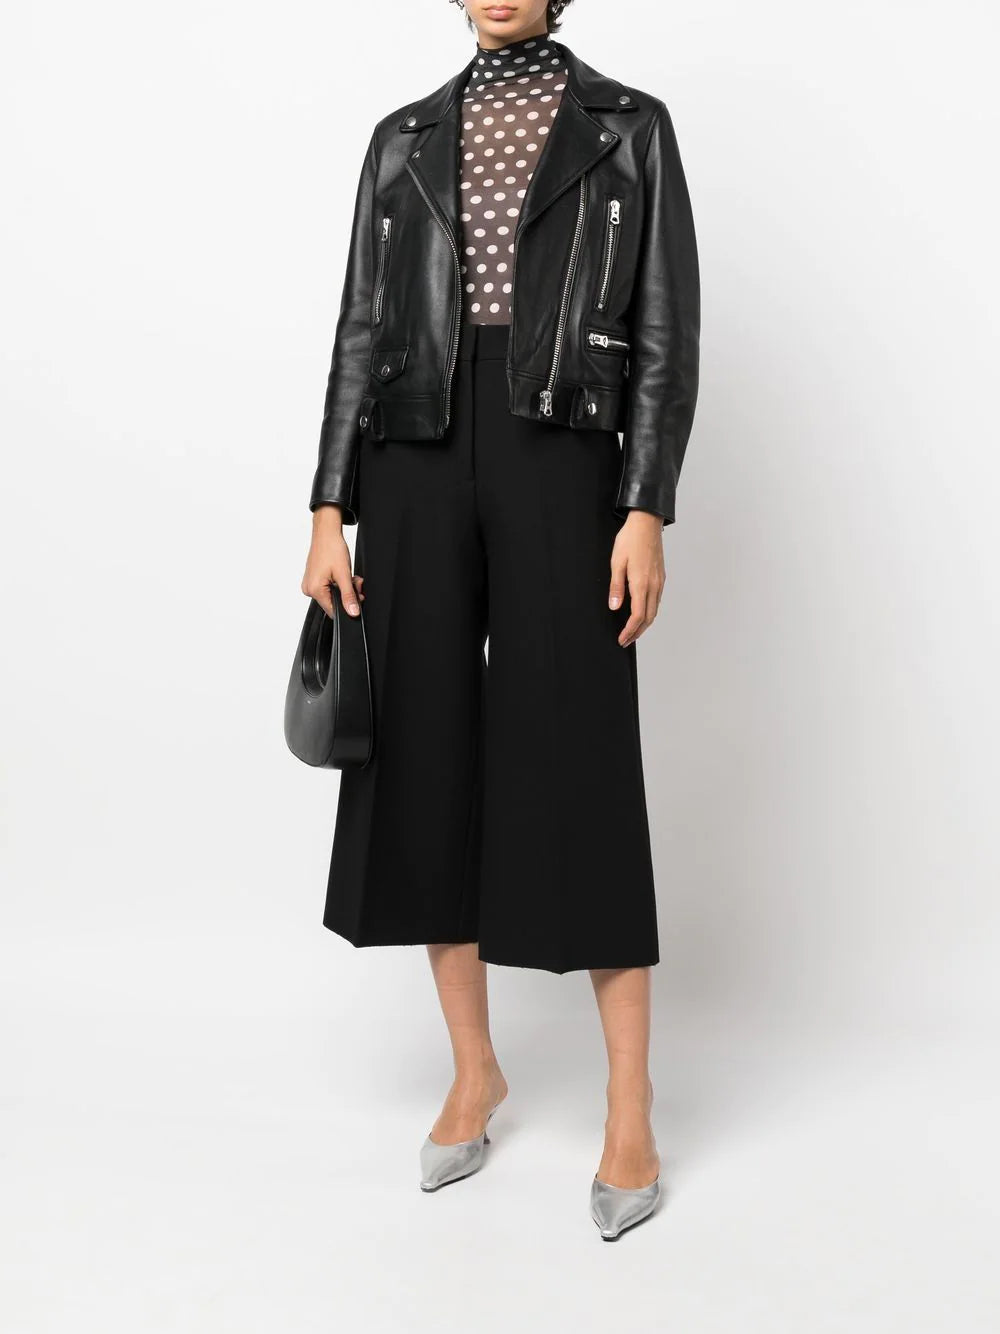 Cropped wide-leg trousers, black